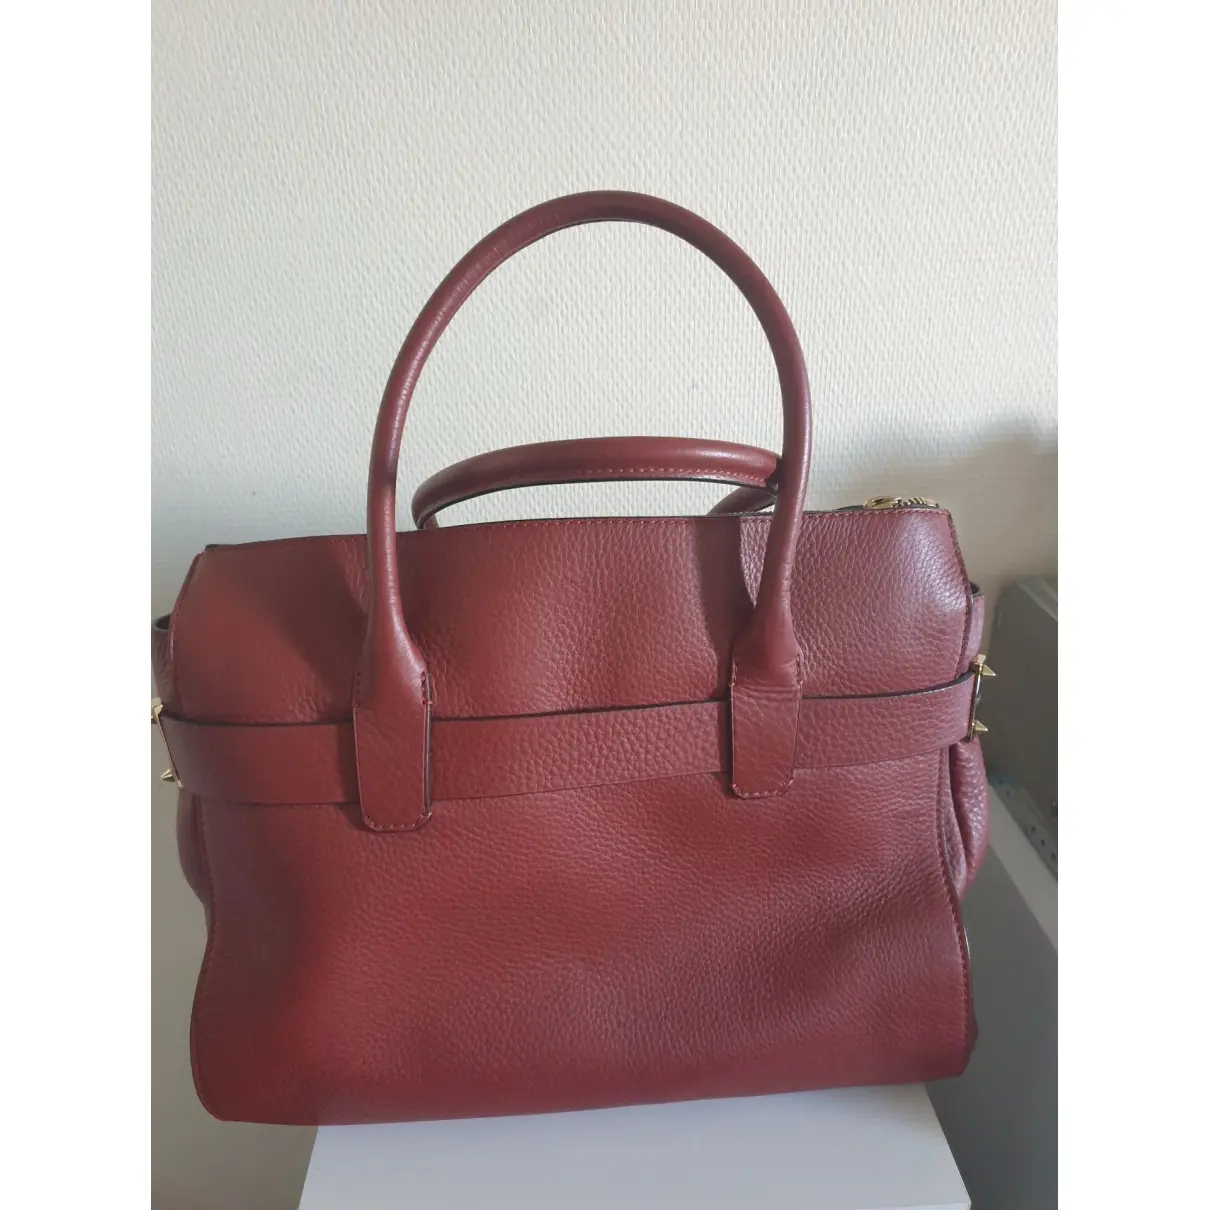 Buy Dsquared2 Leather tote online